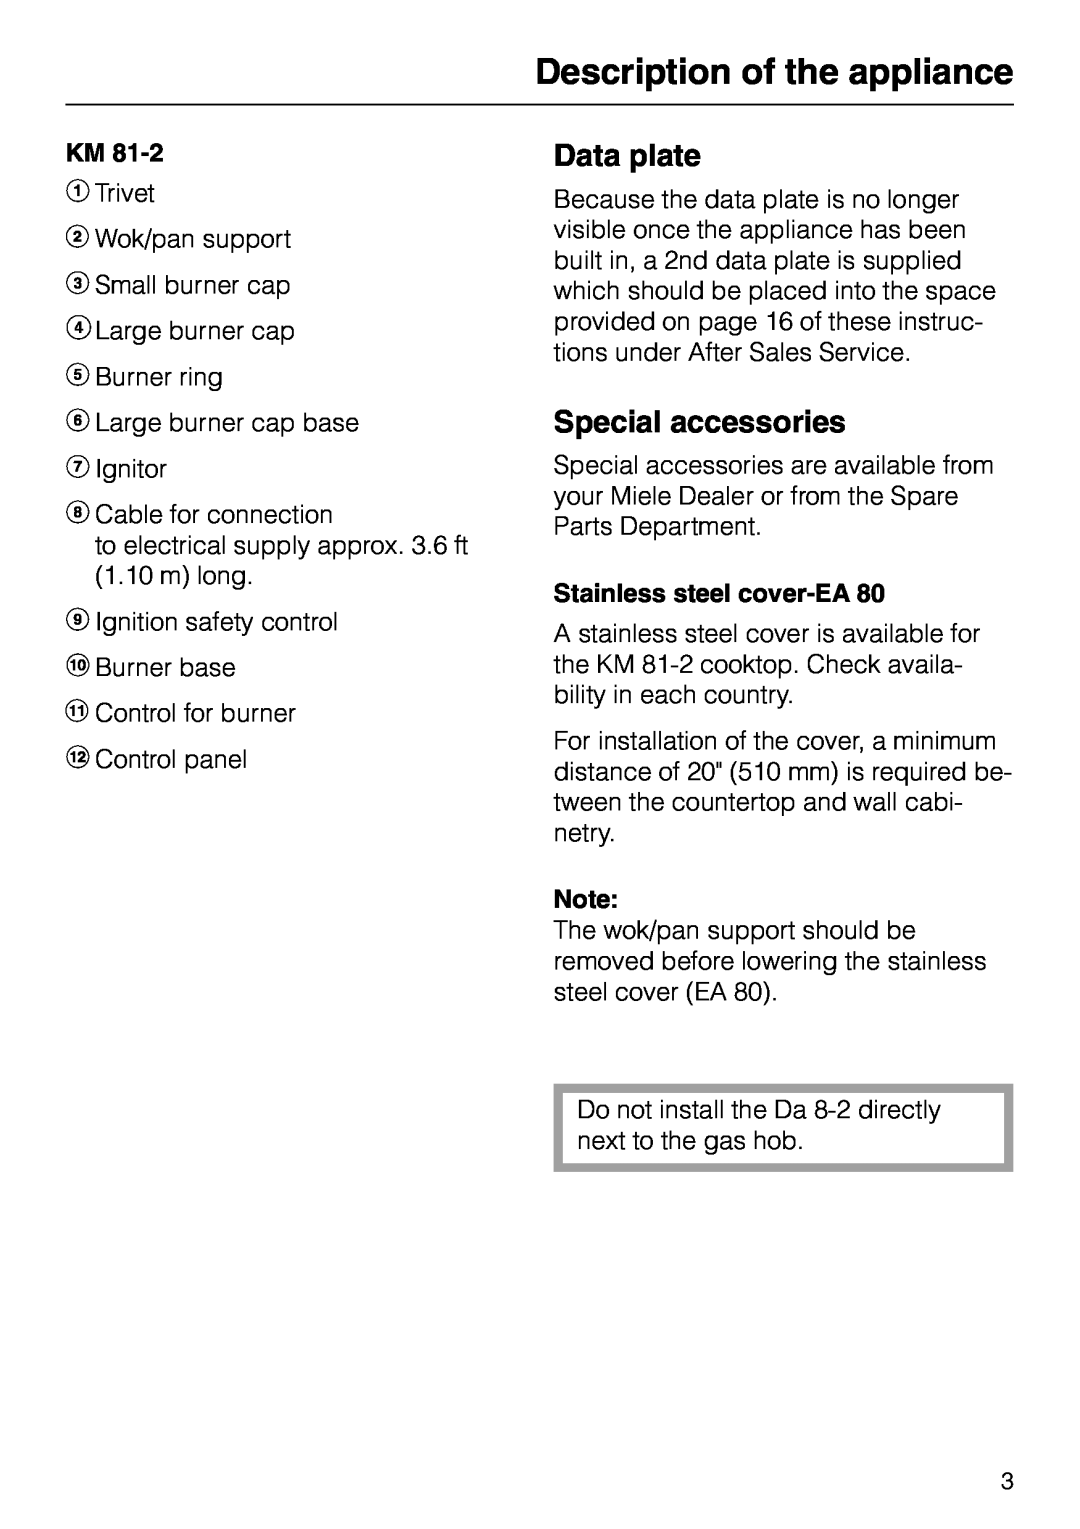 Miele KM 81-2 Data plate, Special accessories, Stainless steel cover-EA80, Description of the appliance 